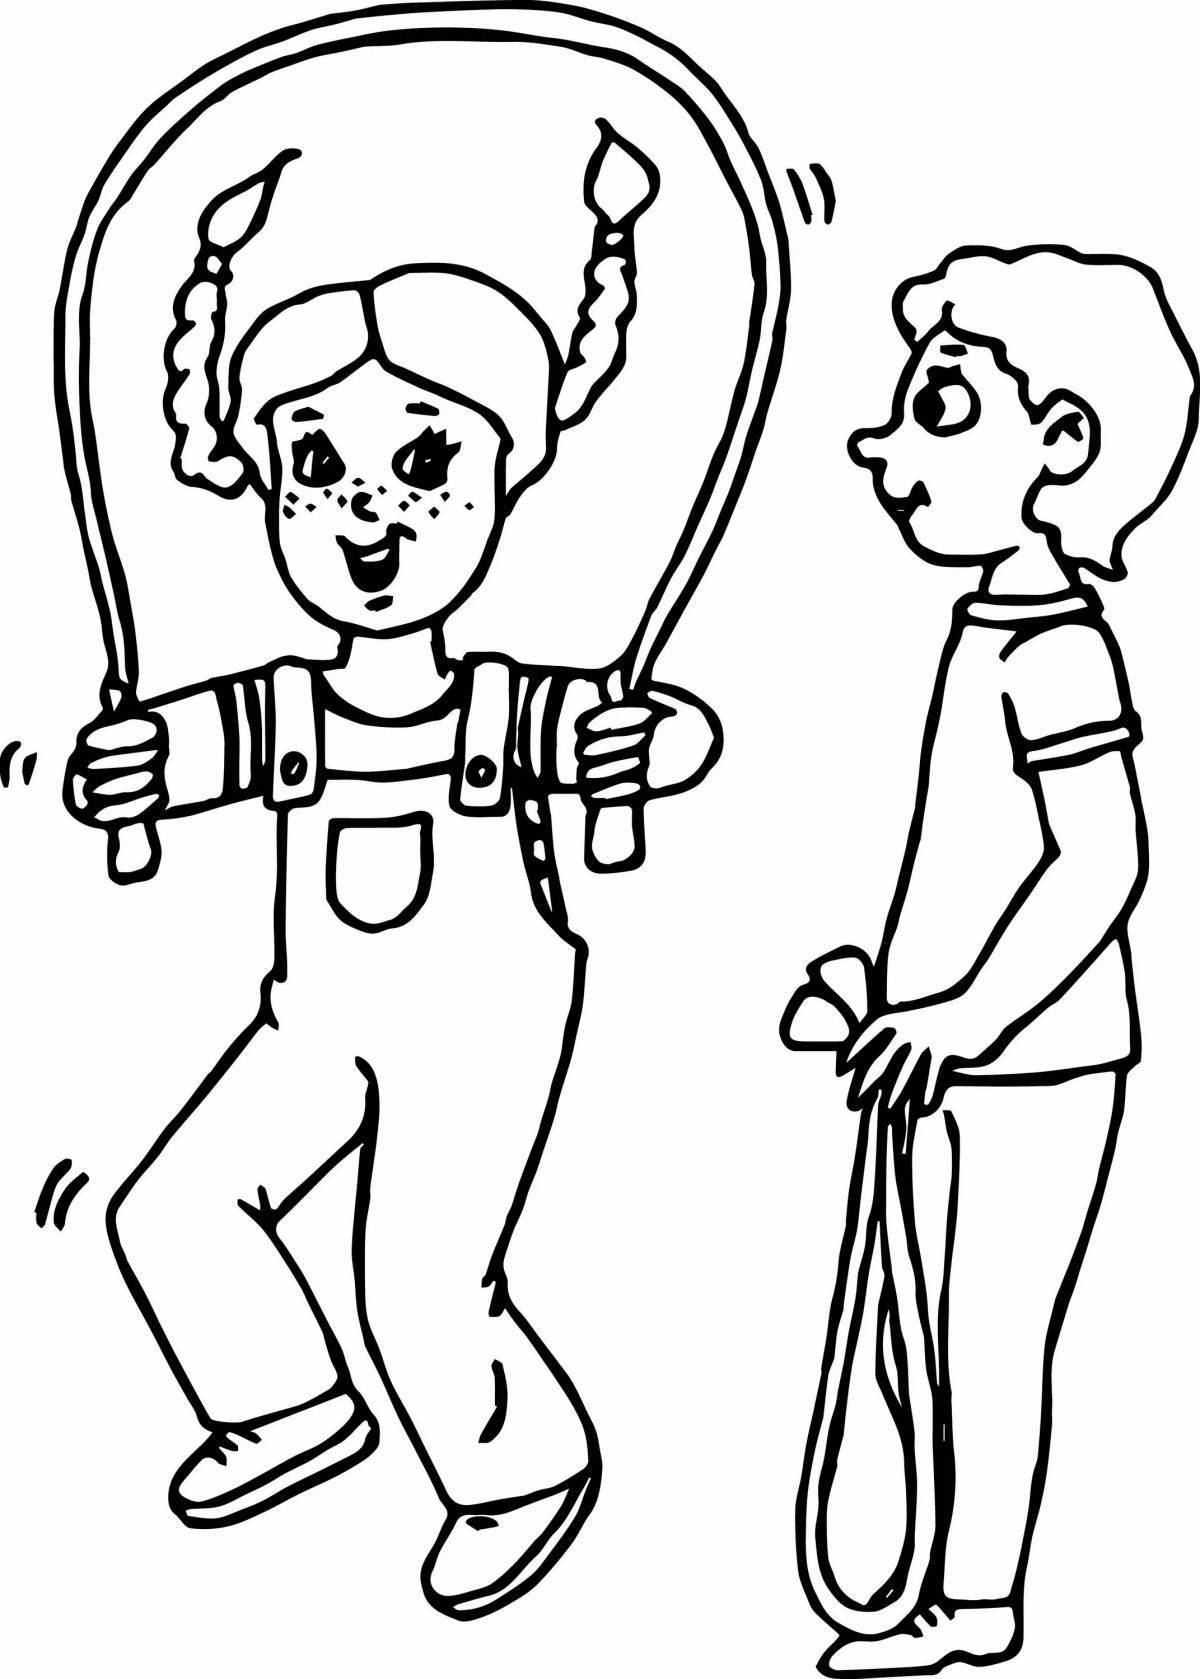 Colorful barto rope coloring page